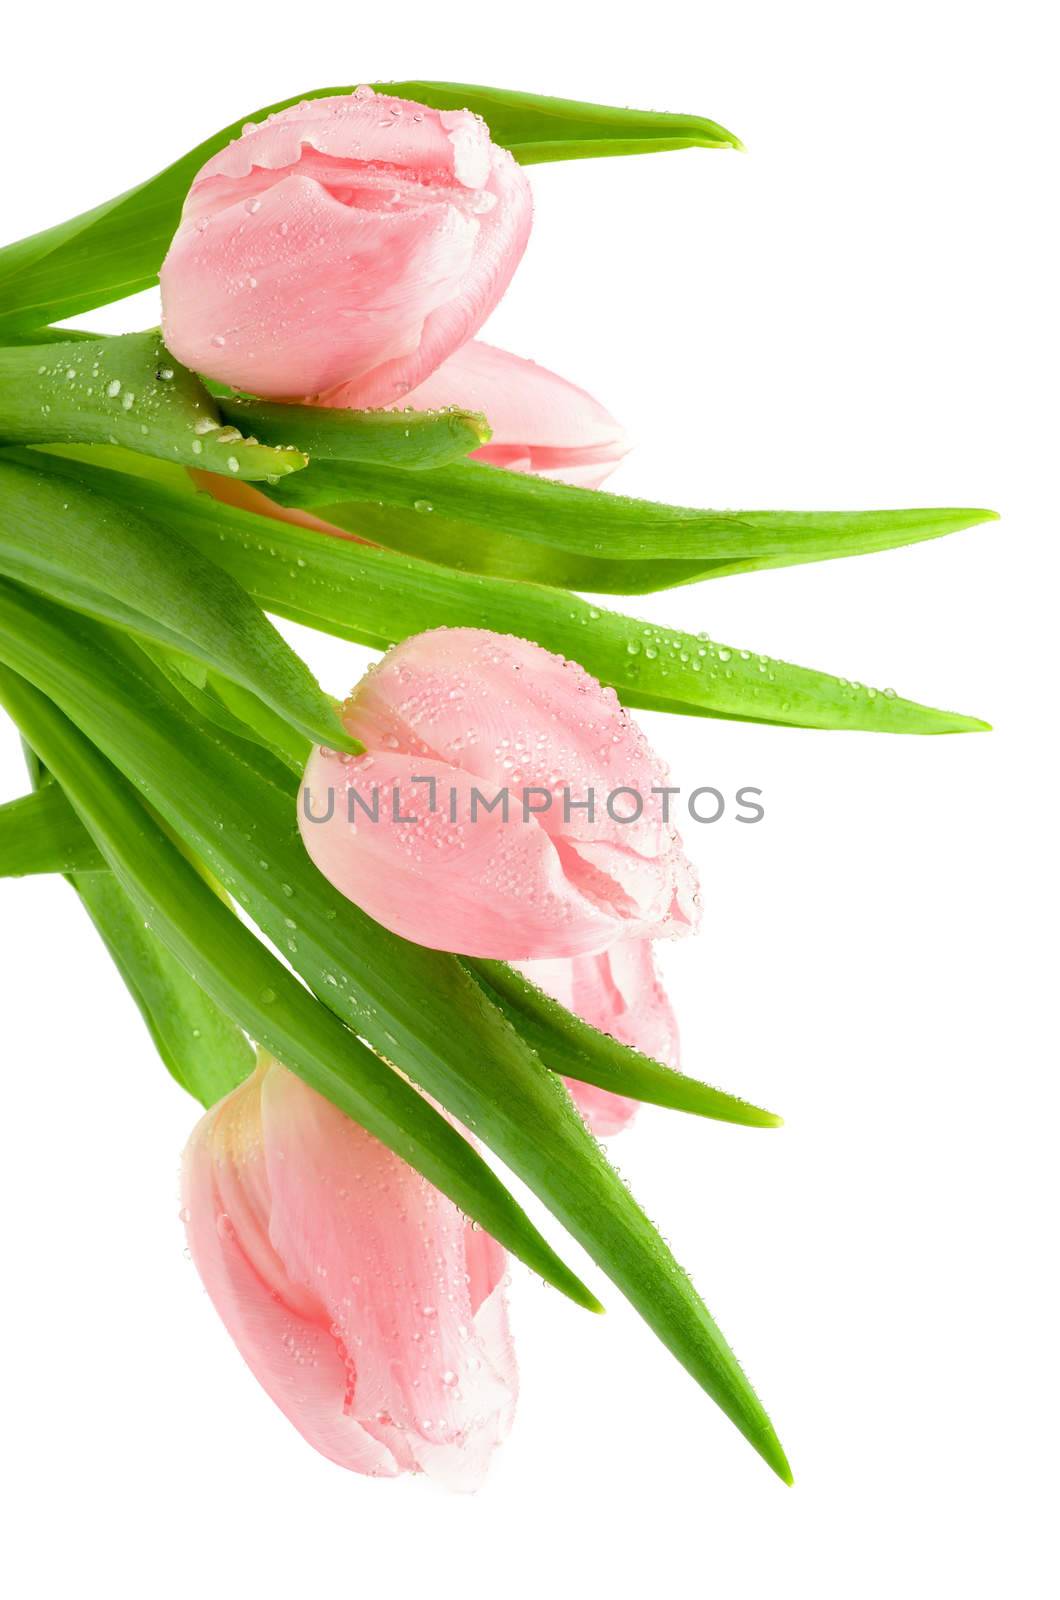 Bunch of Five Beauty Pink Spring Tulips with Water Droplets isolated on white background